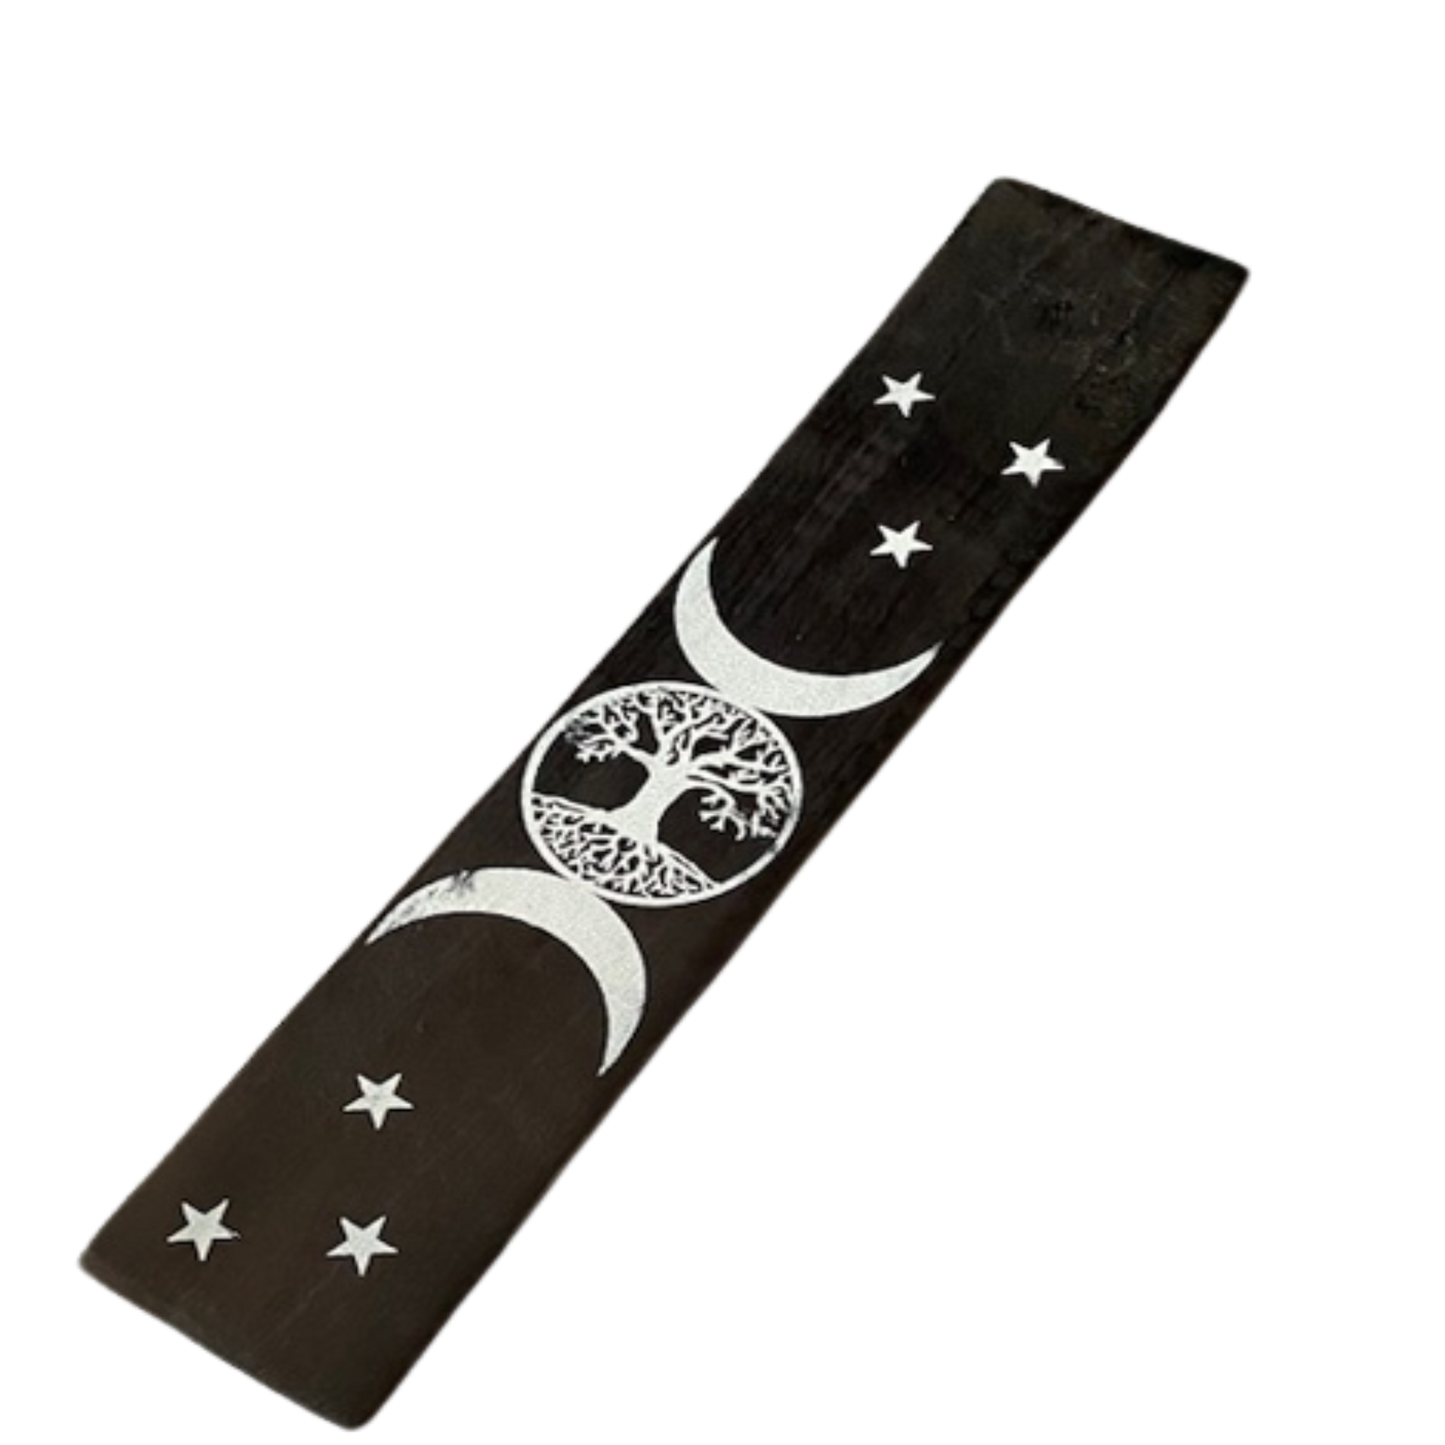 Incense Holder Black and White Tree of Life Triple Moon design